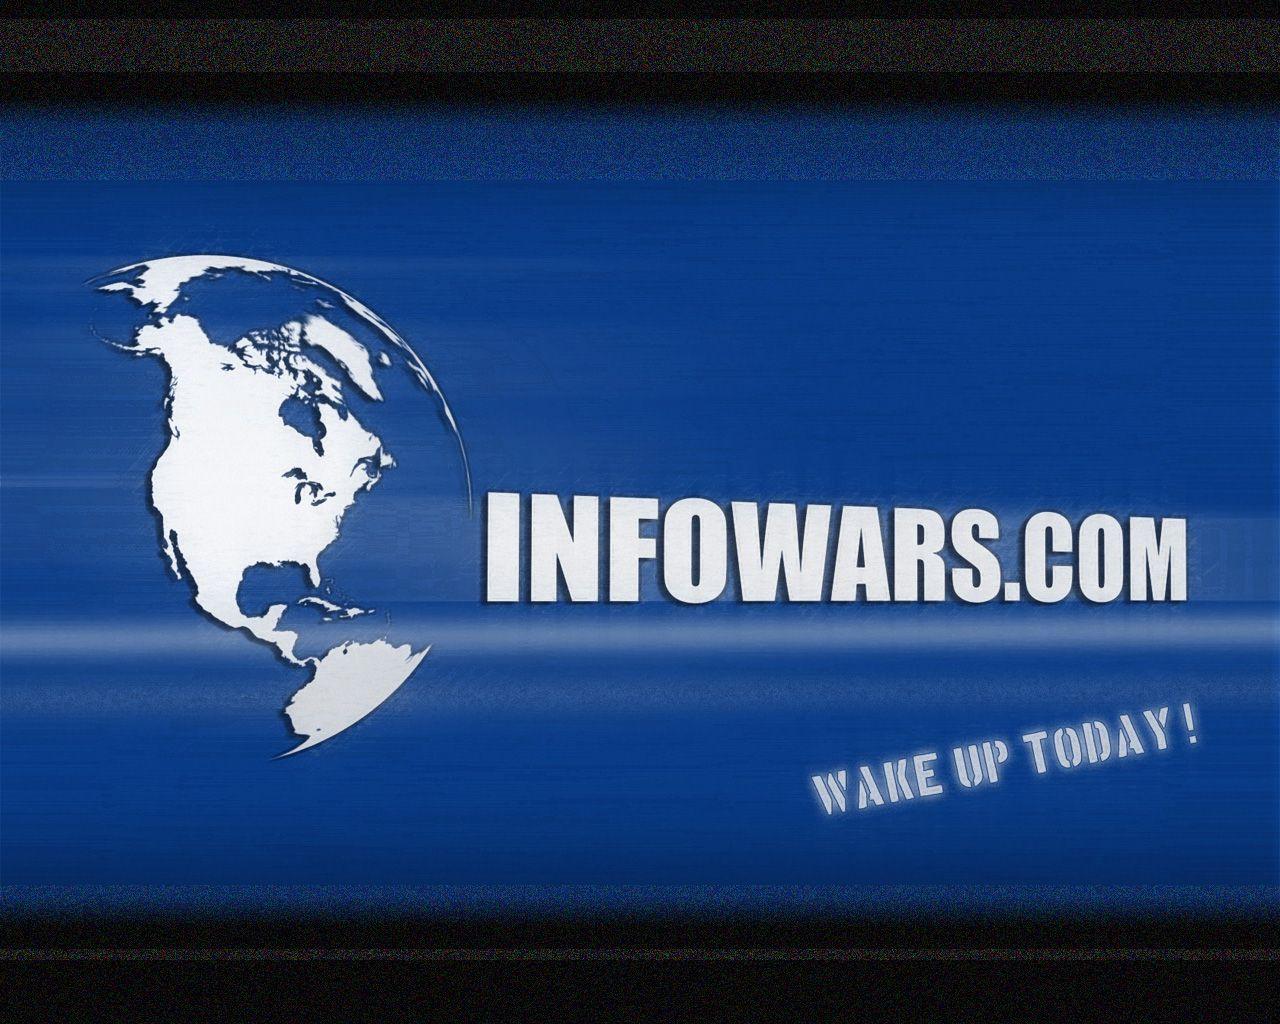 INFOWARS .COM Download HD Wallpaper and Free Image